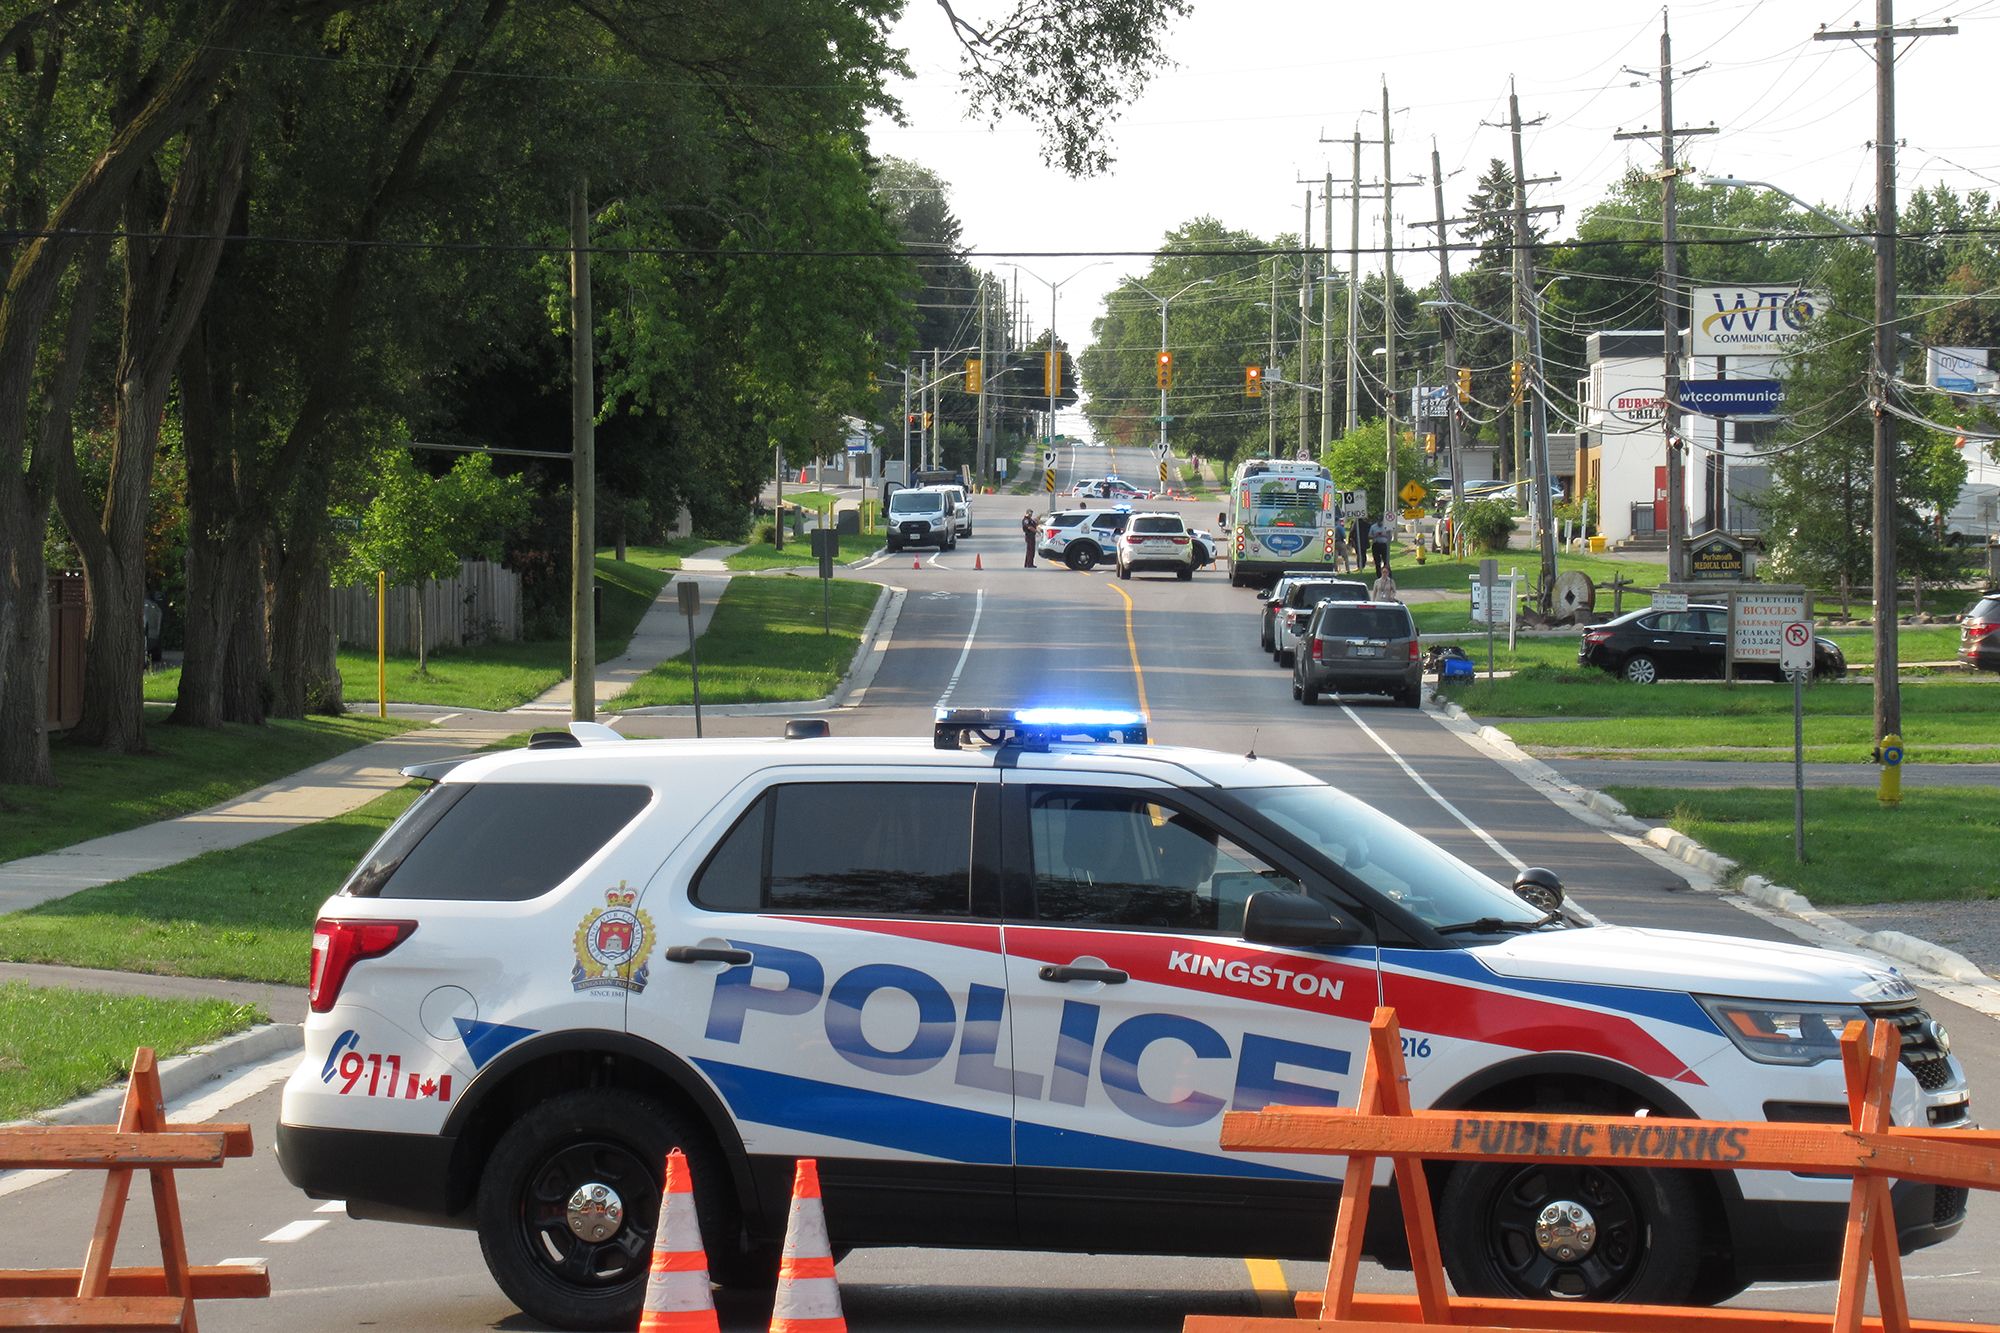 Man Surrenders To Kingston Police After 27 Hour Standoff The Kingston Whig Standard 